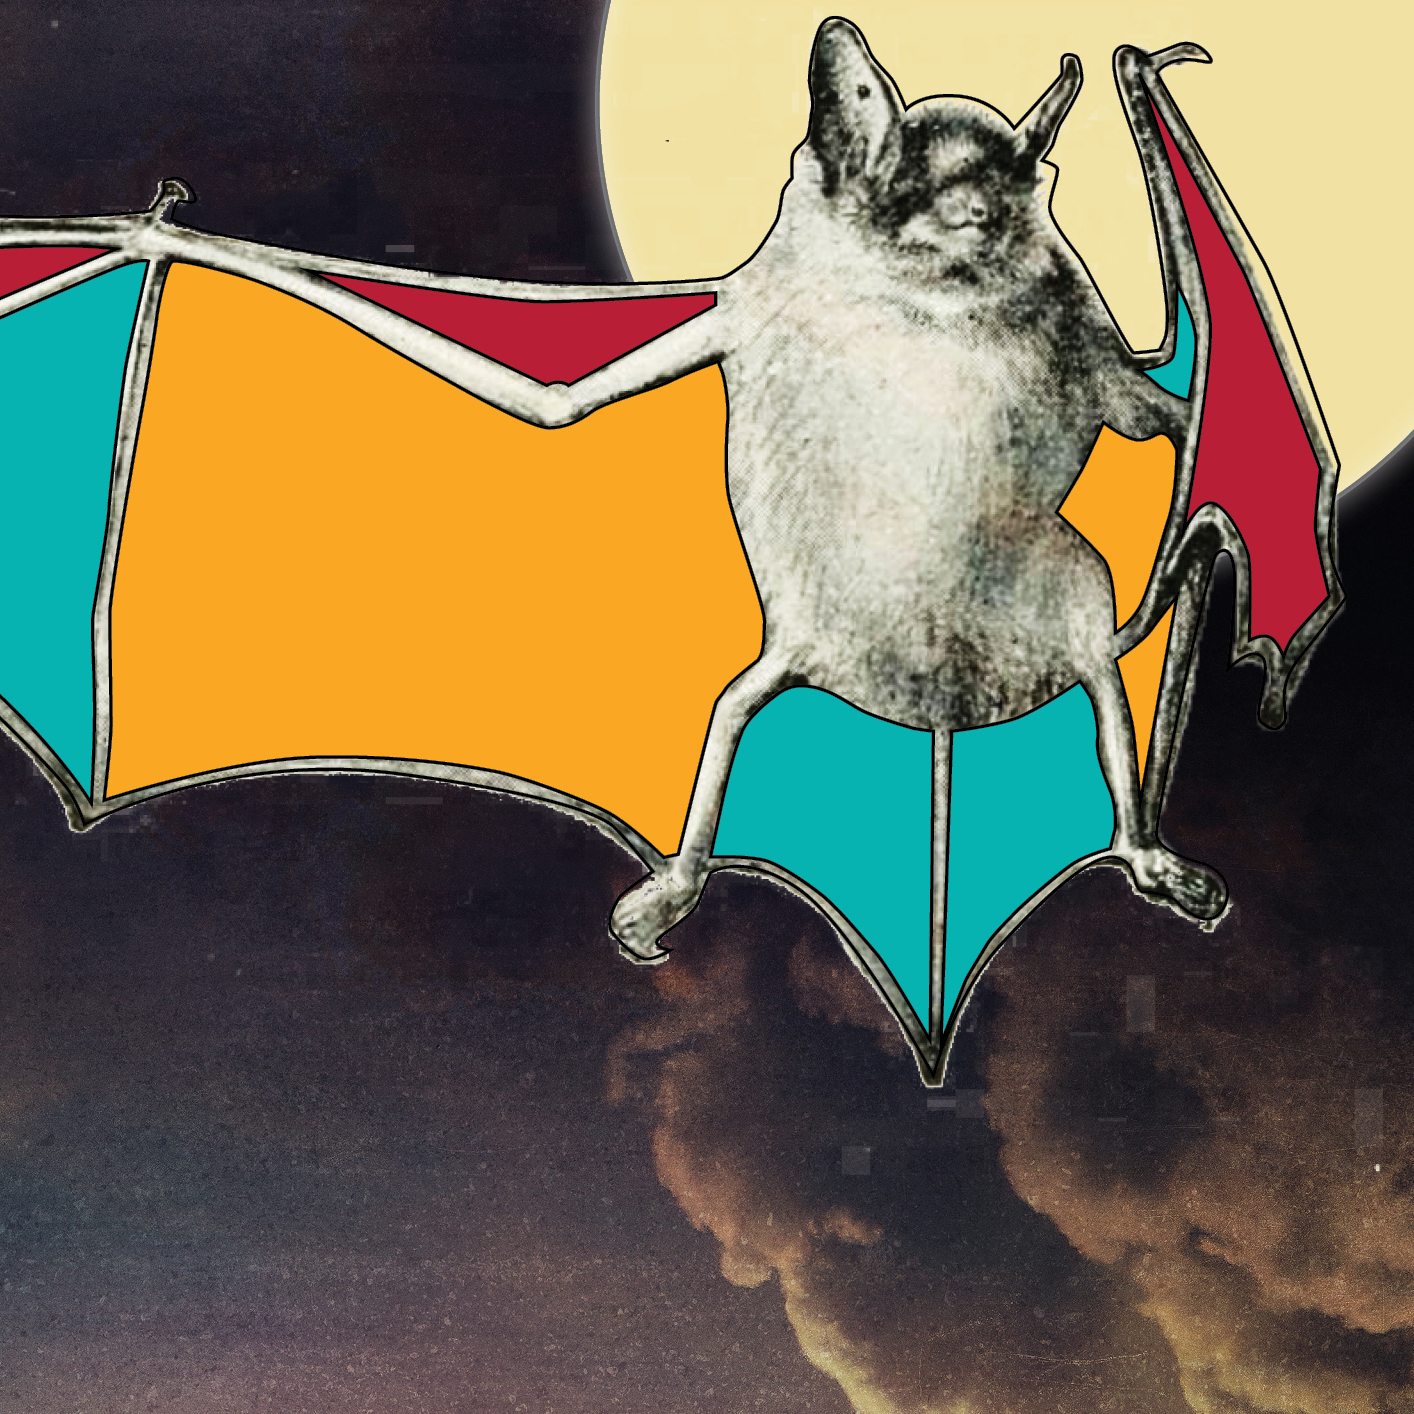 A bat in front of the moon with bright colors applied to its wings.